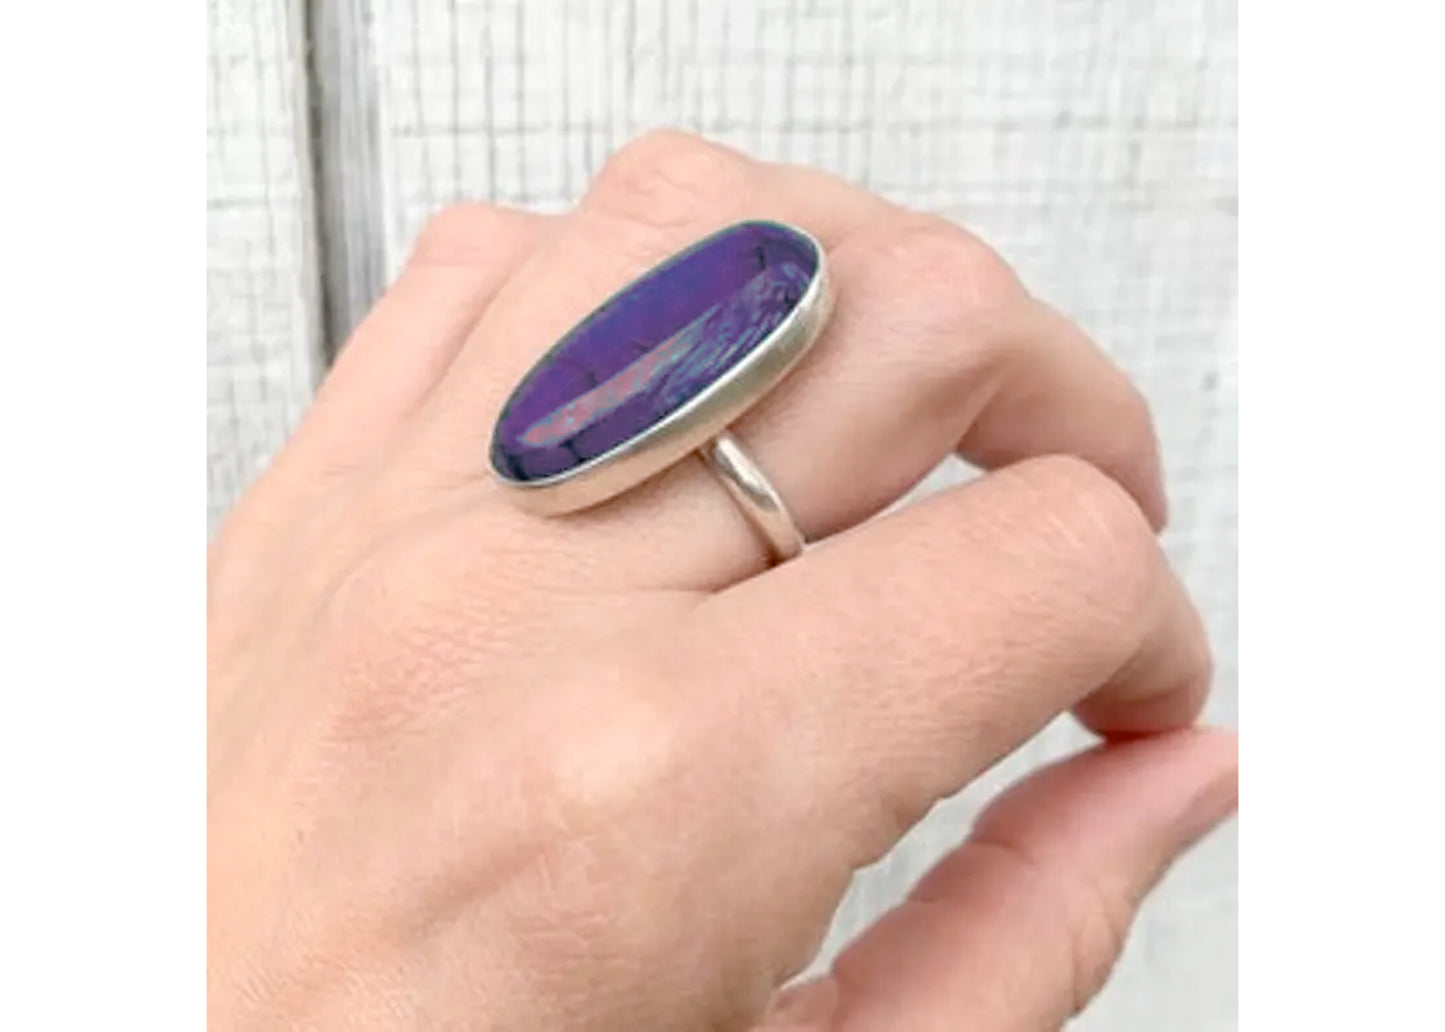 Large Oval Ring in Purple Dragon Vein Agate